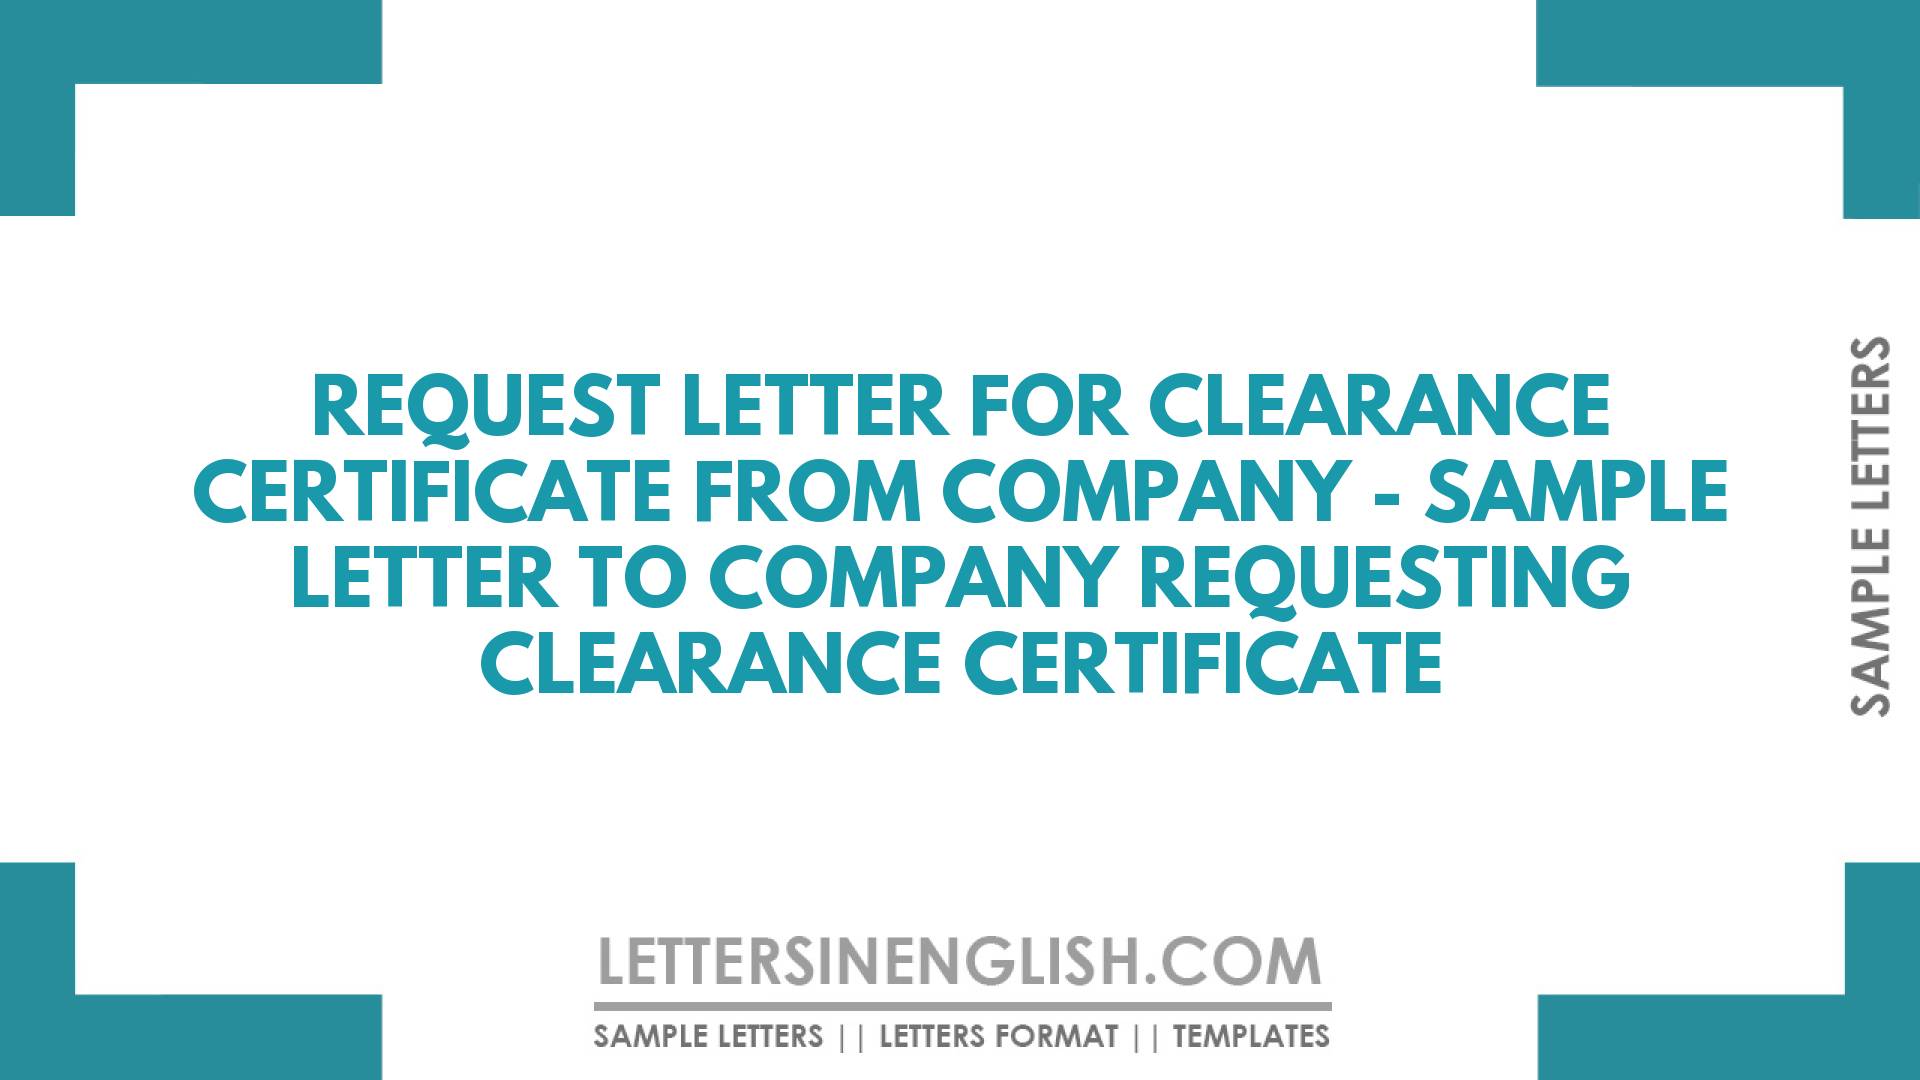 Request Letter for Clearance Certificate from Company – Sample Letter to Company Requesting Clearance Certificate